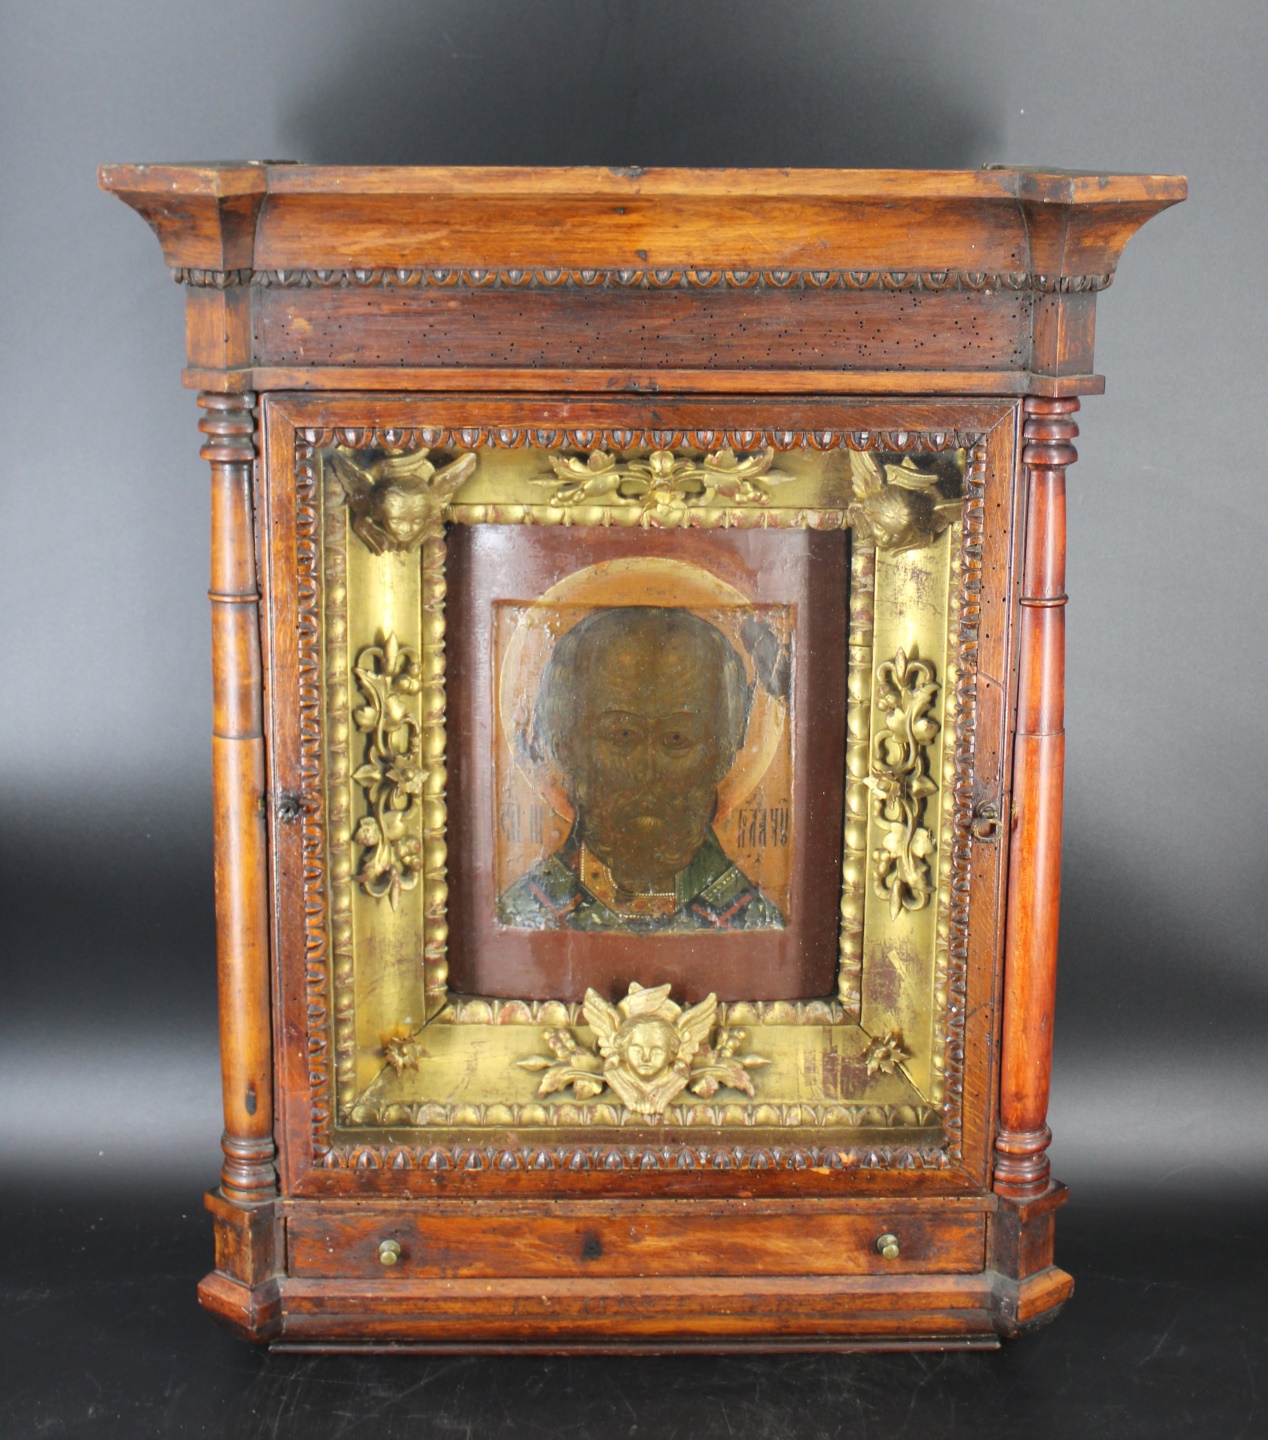 18TH CENTURY RUSSIAN ICON IN DISPLAY